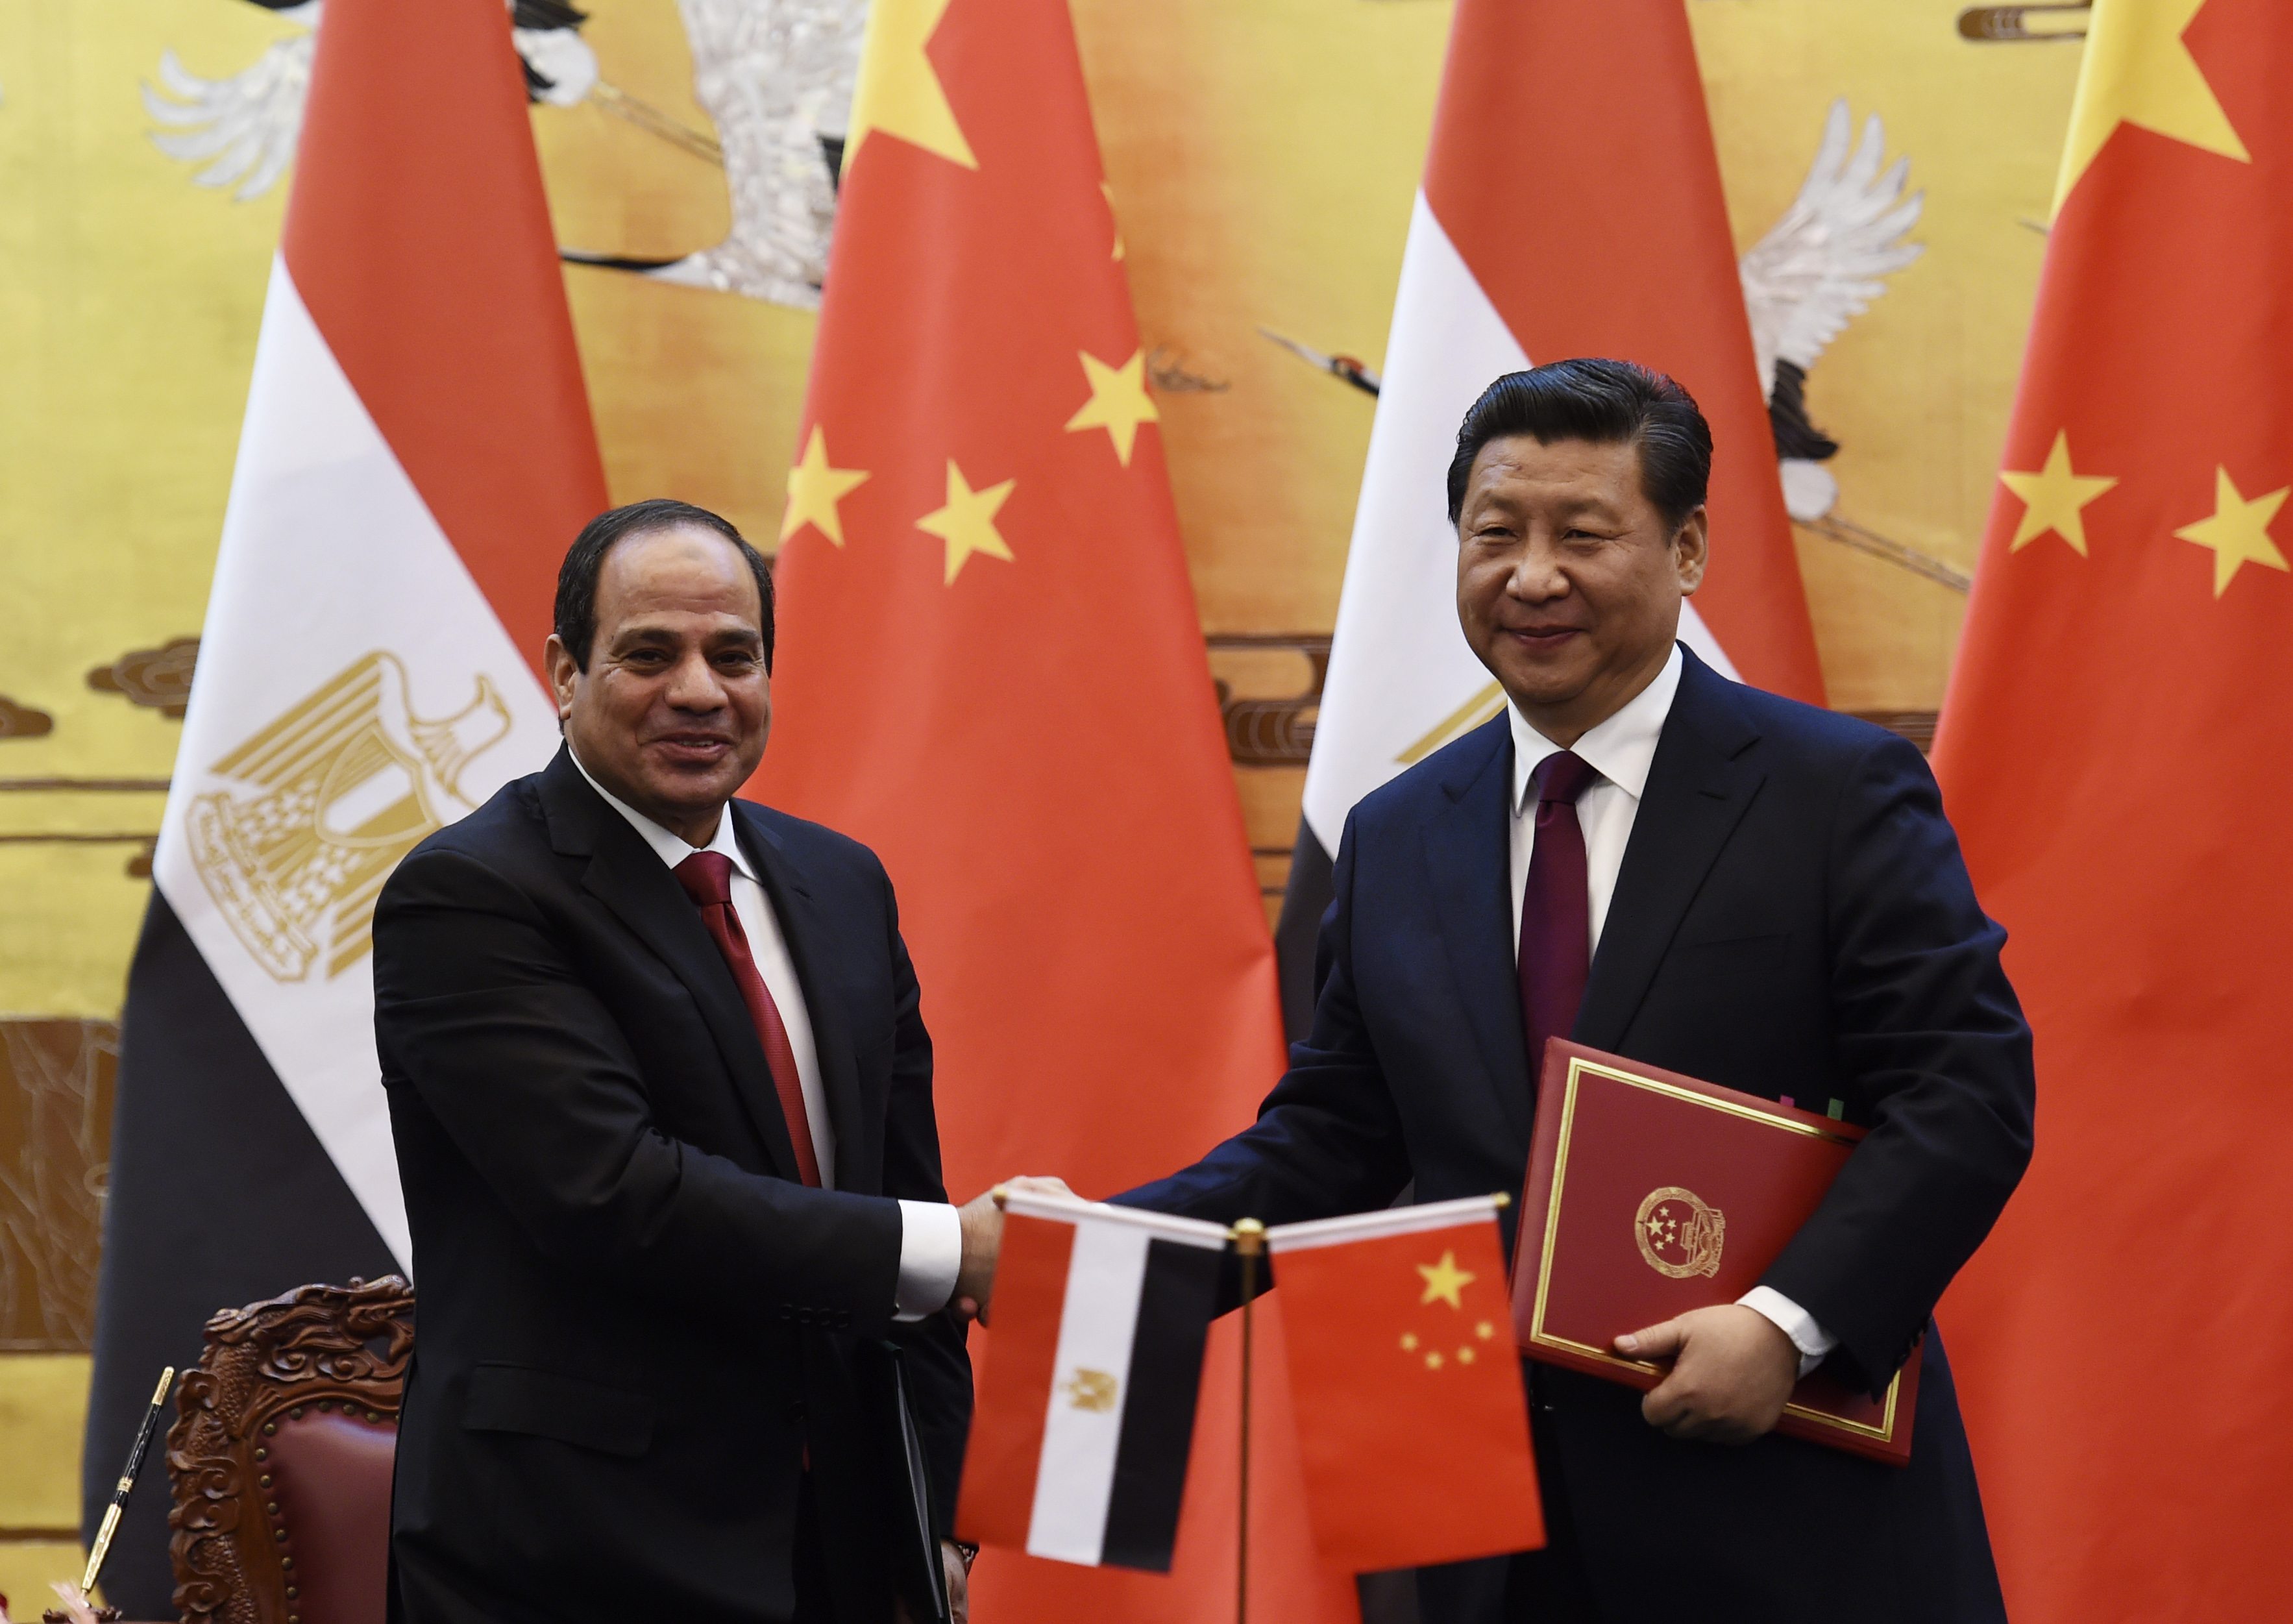 Egypt's President Abdel Fattah al-Sisi (L) shakes hands with Chinese President Xi Jinping during a signing ceremony in the Great Hall of the People in Beijing December 23, 2014.   REUTERS/Greg Baker/Pool  